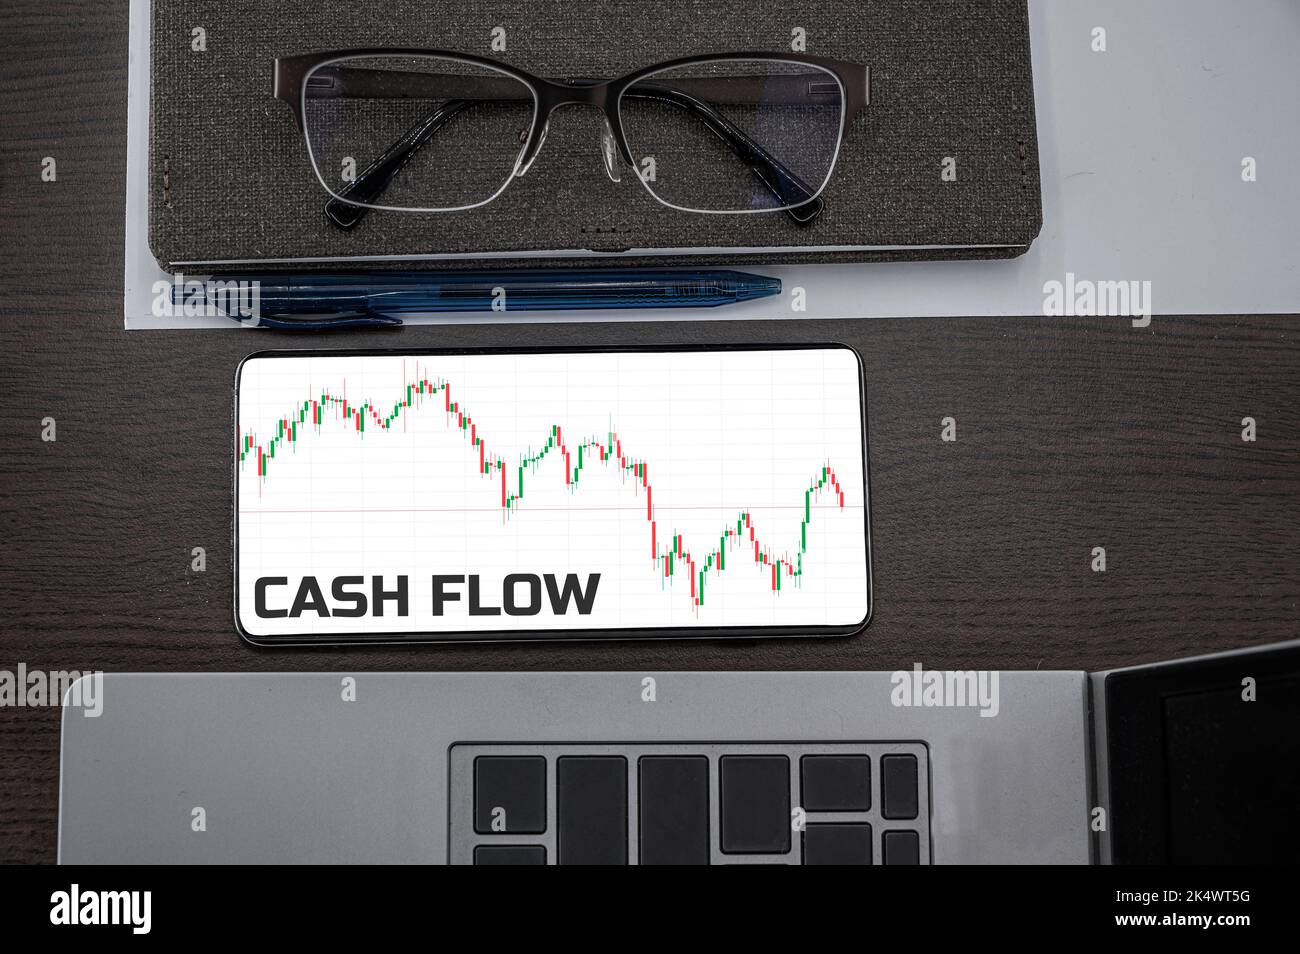 Cash flow text in phone. Top view of chart in the phone on the table near laptop, notepad, and glasses. Stock Photo